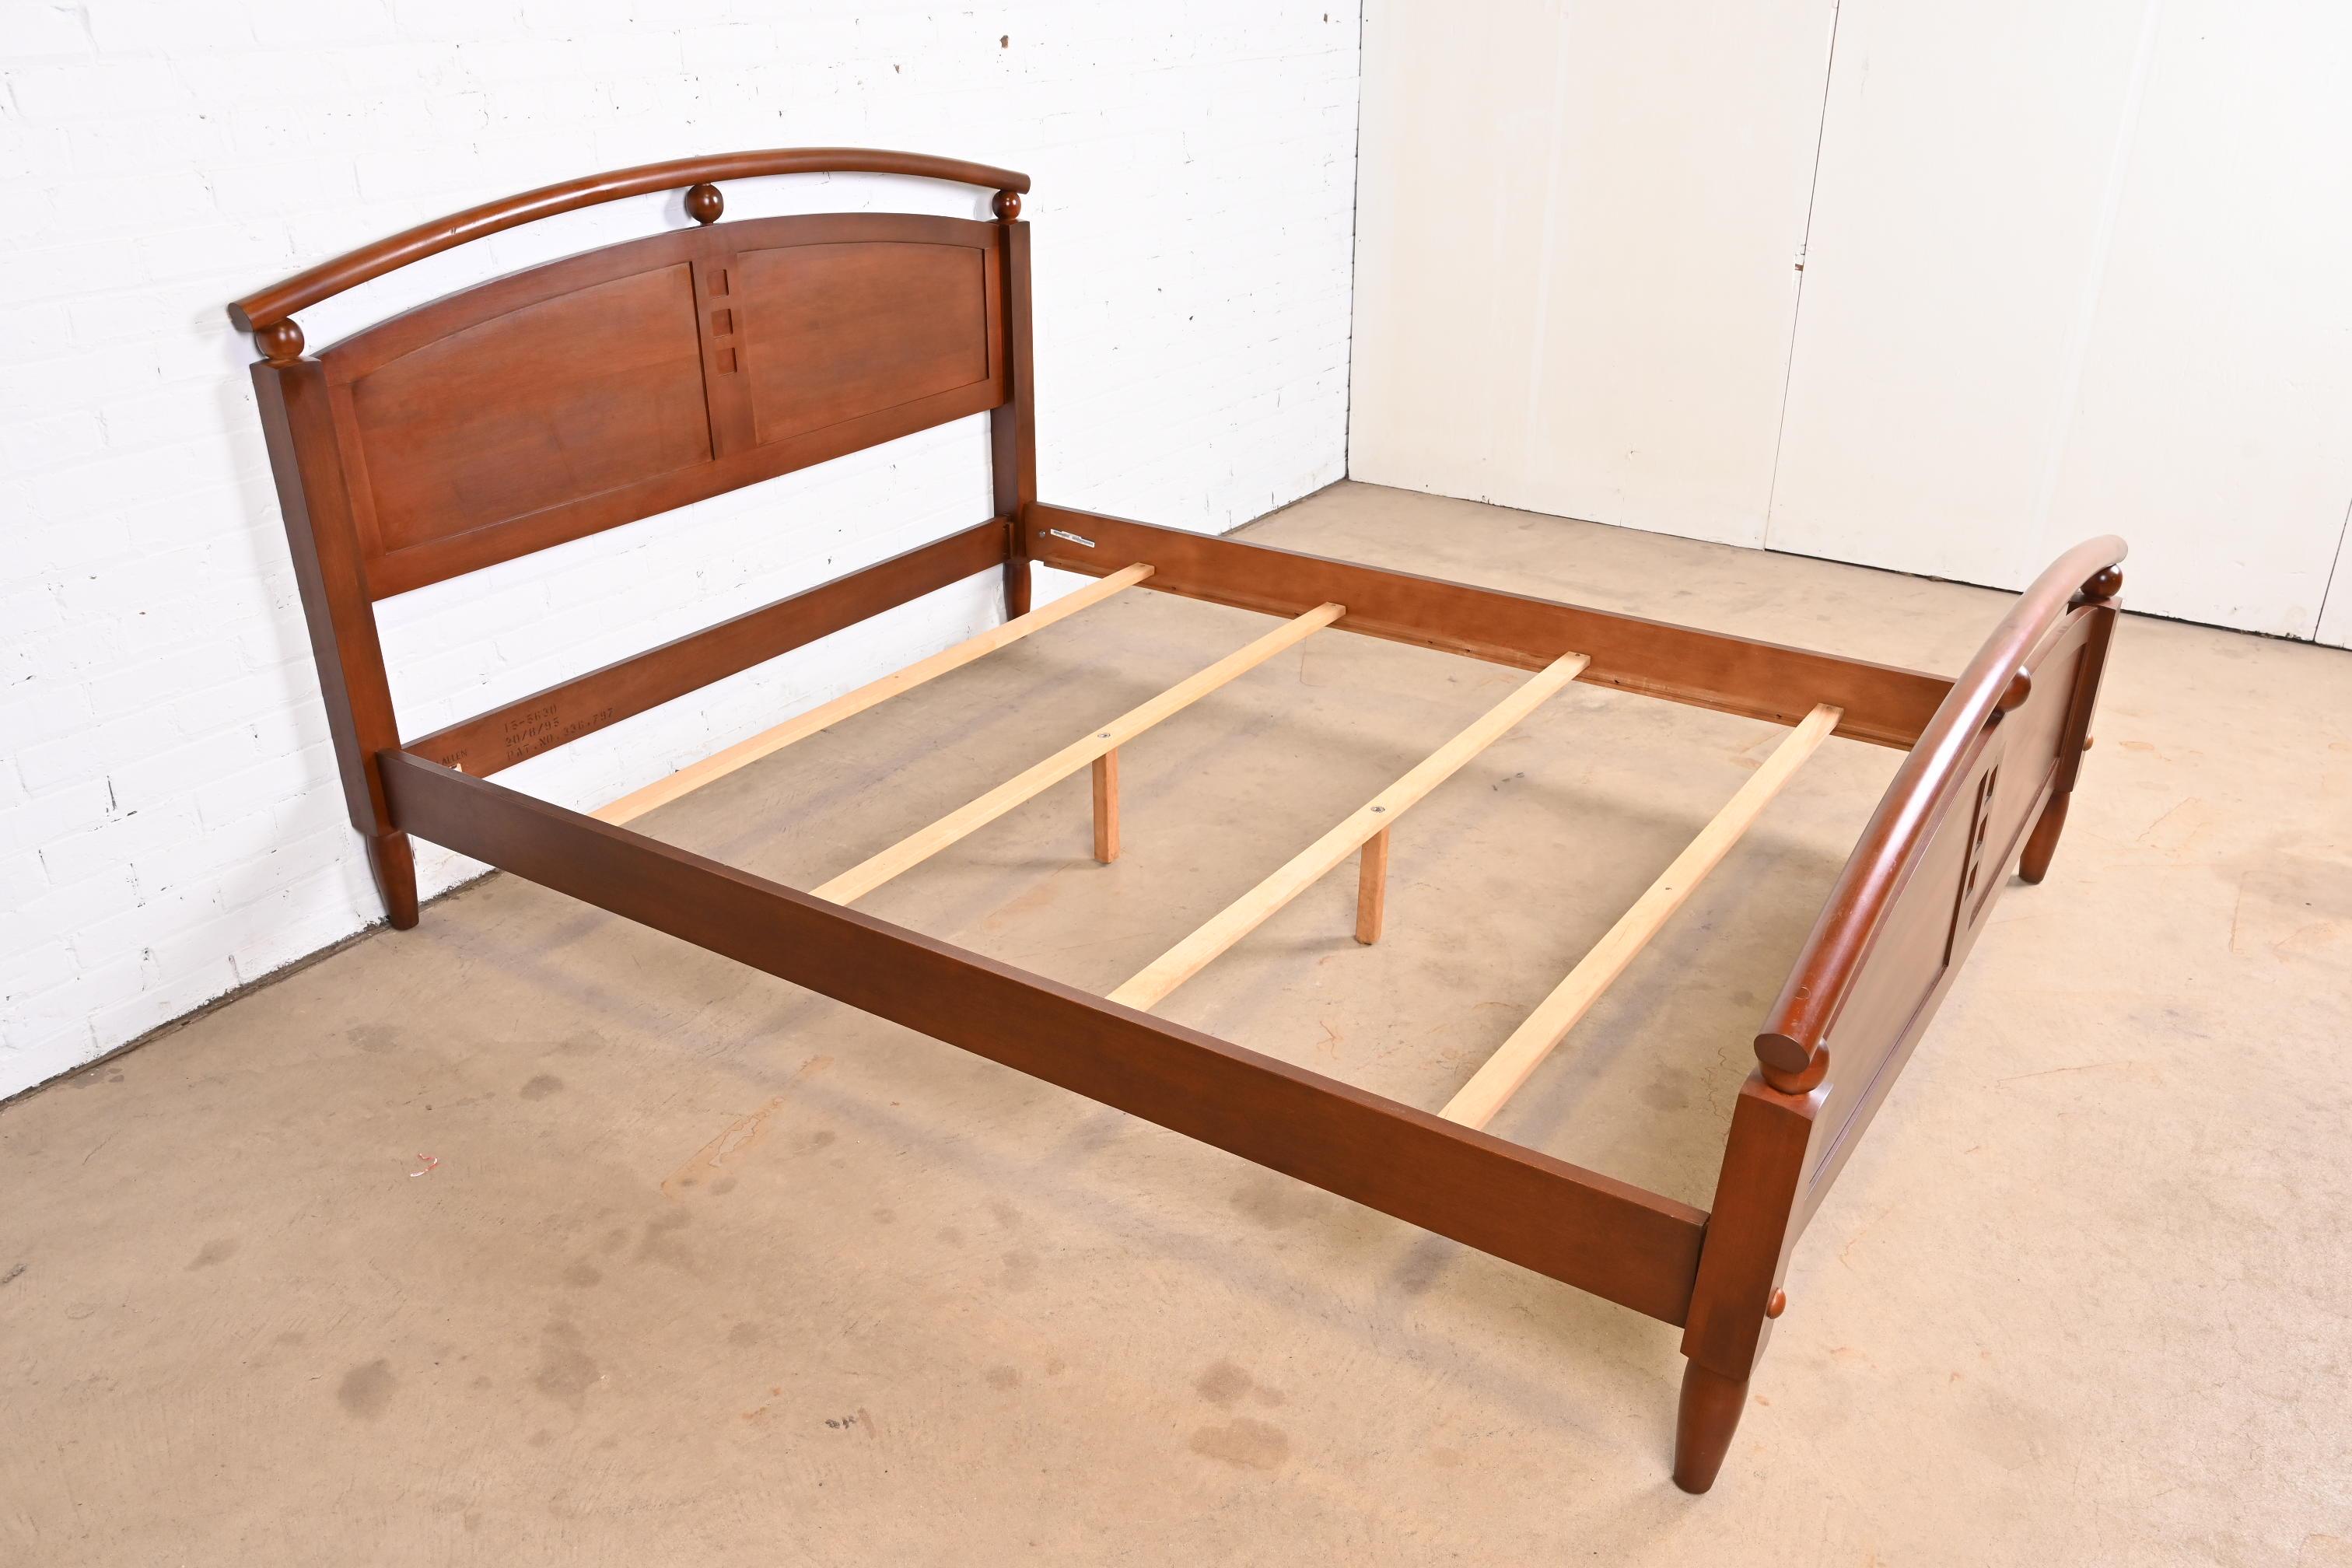 Ethan Allen American Dimensions Modern Cherry Wood Queen Size Bed 1